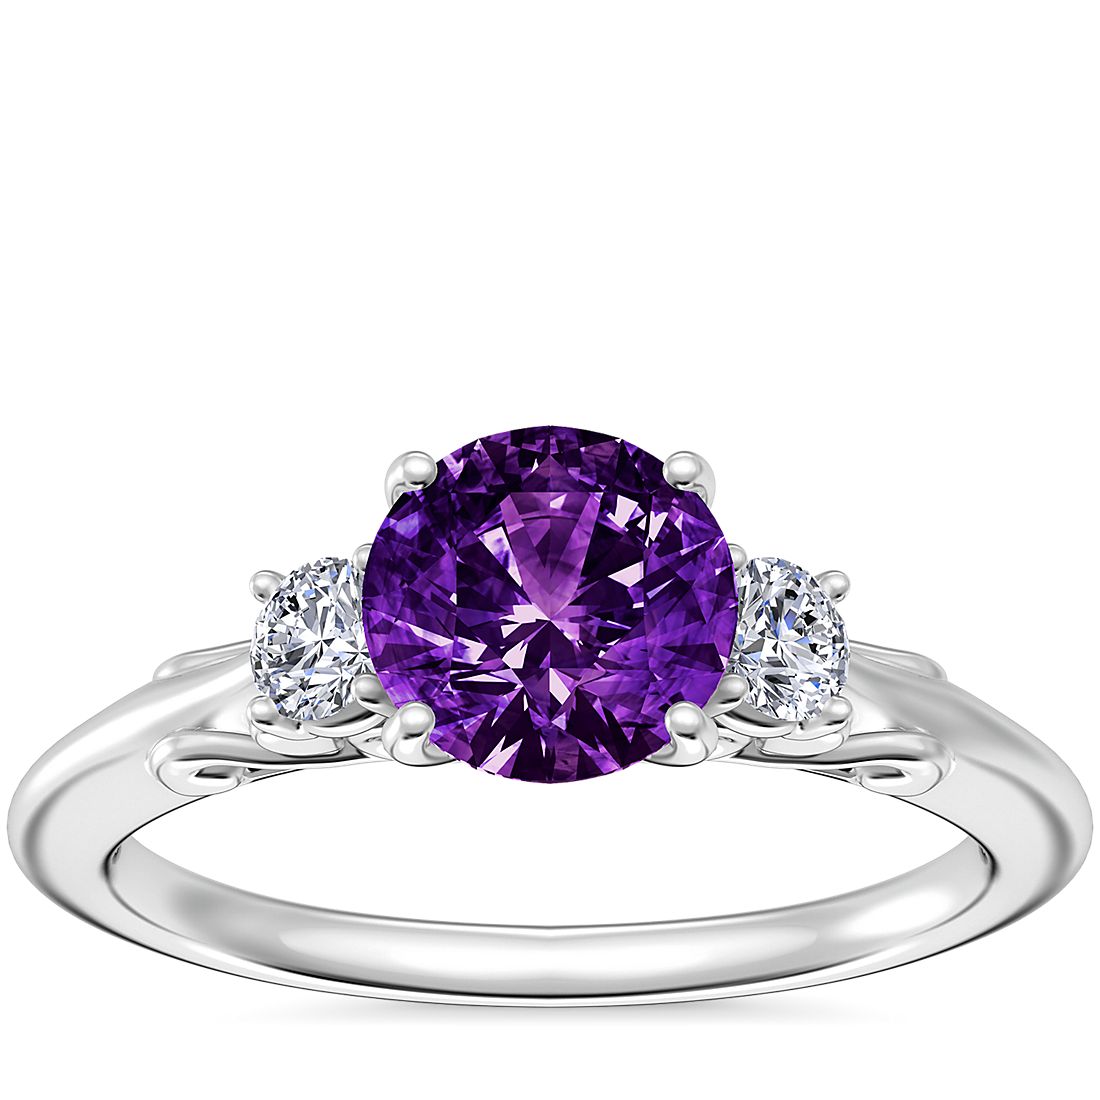 Vintage Three Stone Engagement Ring with Round Amethyst in 18k White Gold (6.5mm)